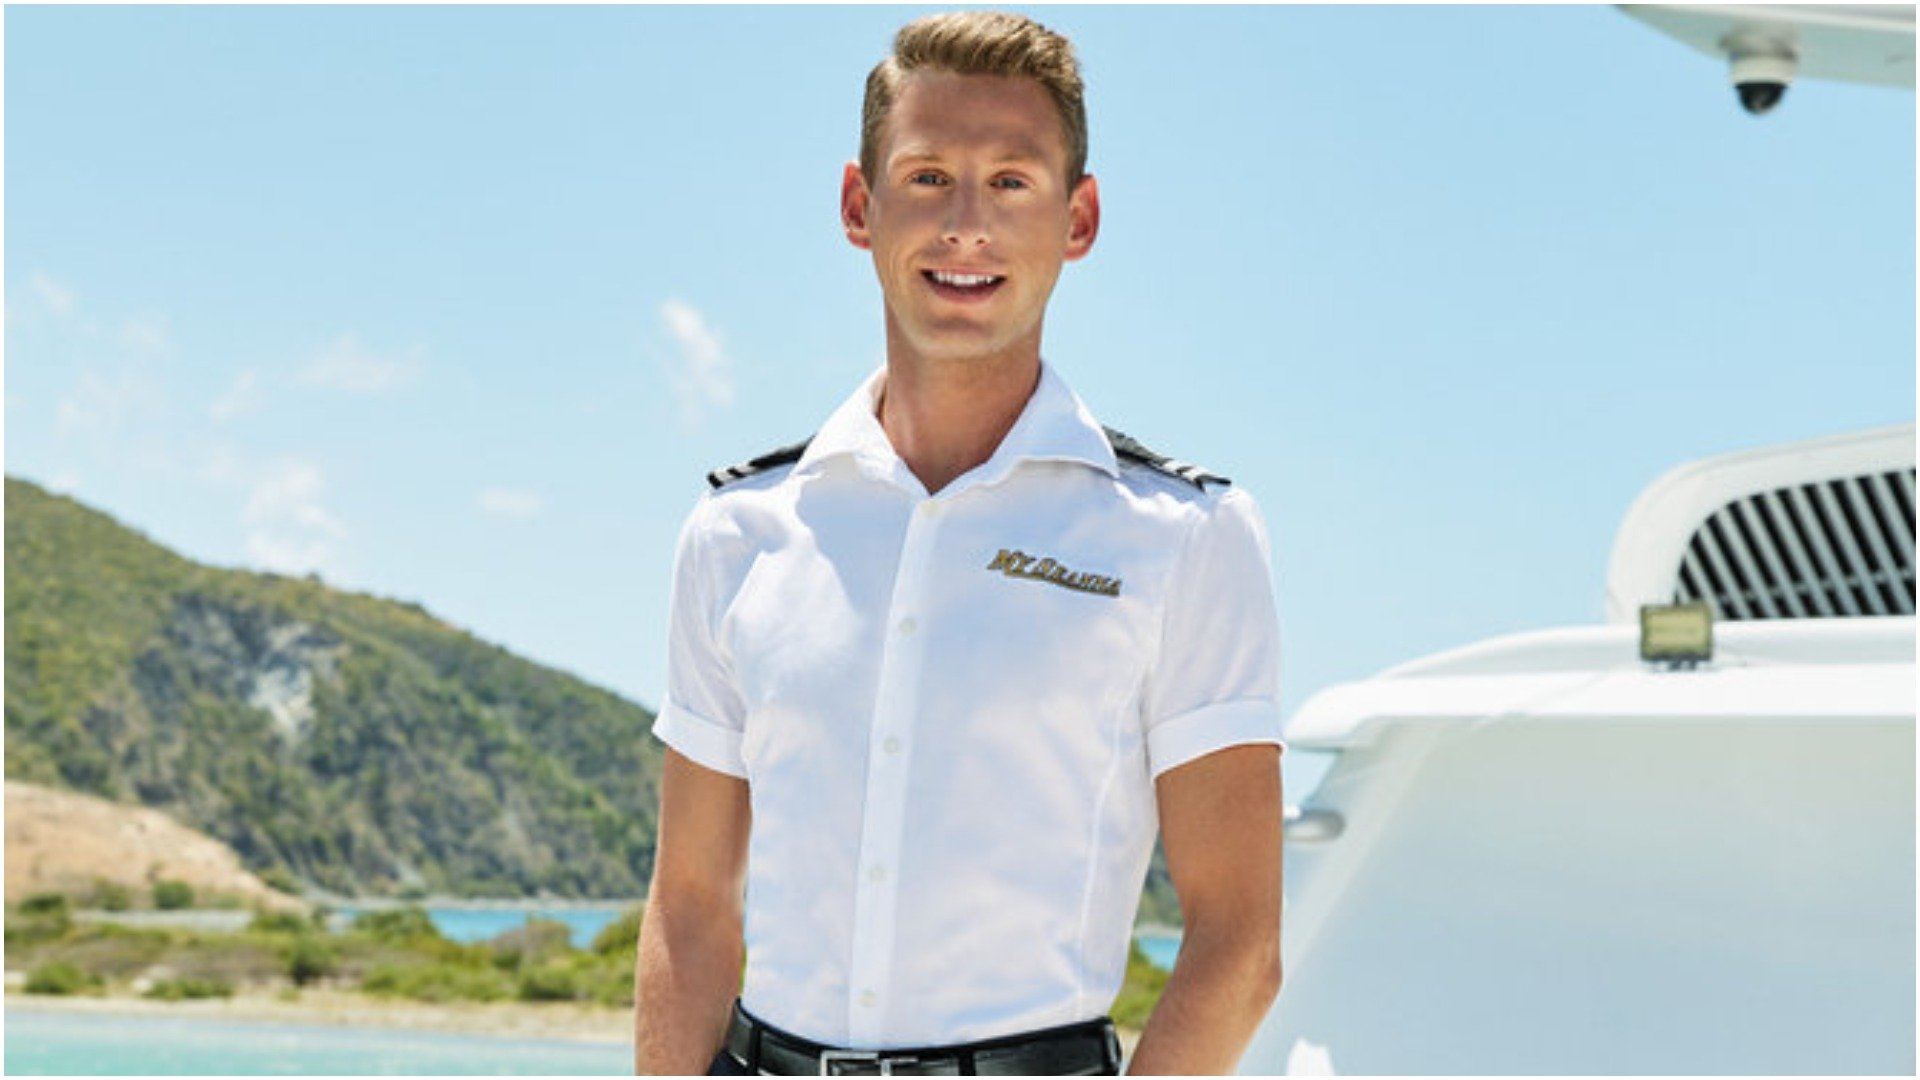 Fraser from Below Deck dished on being on the show and working for Captain Lee